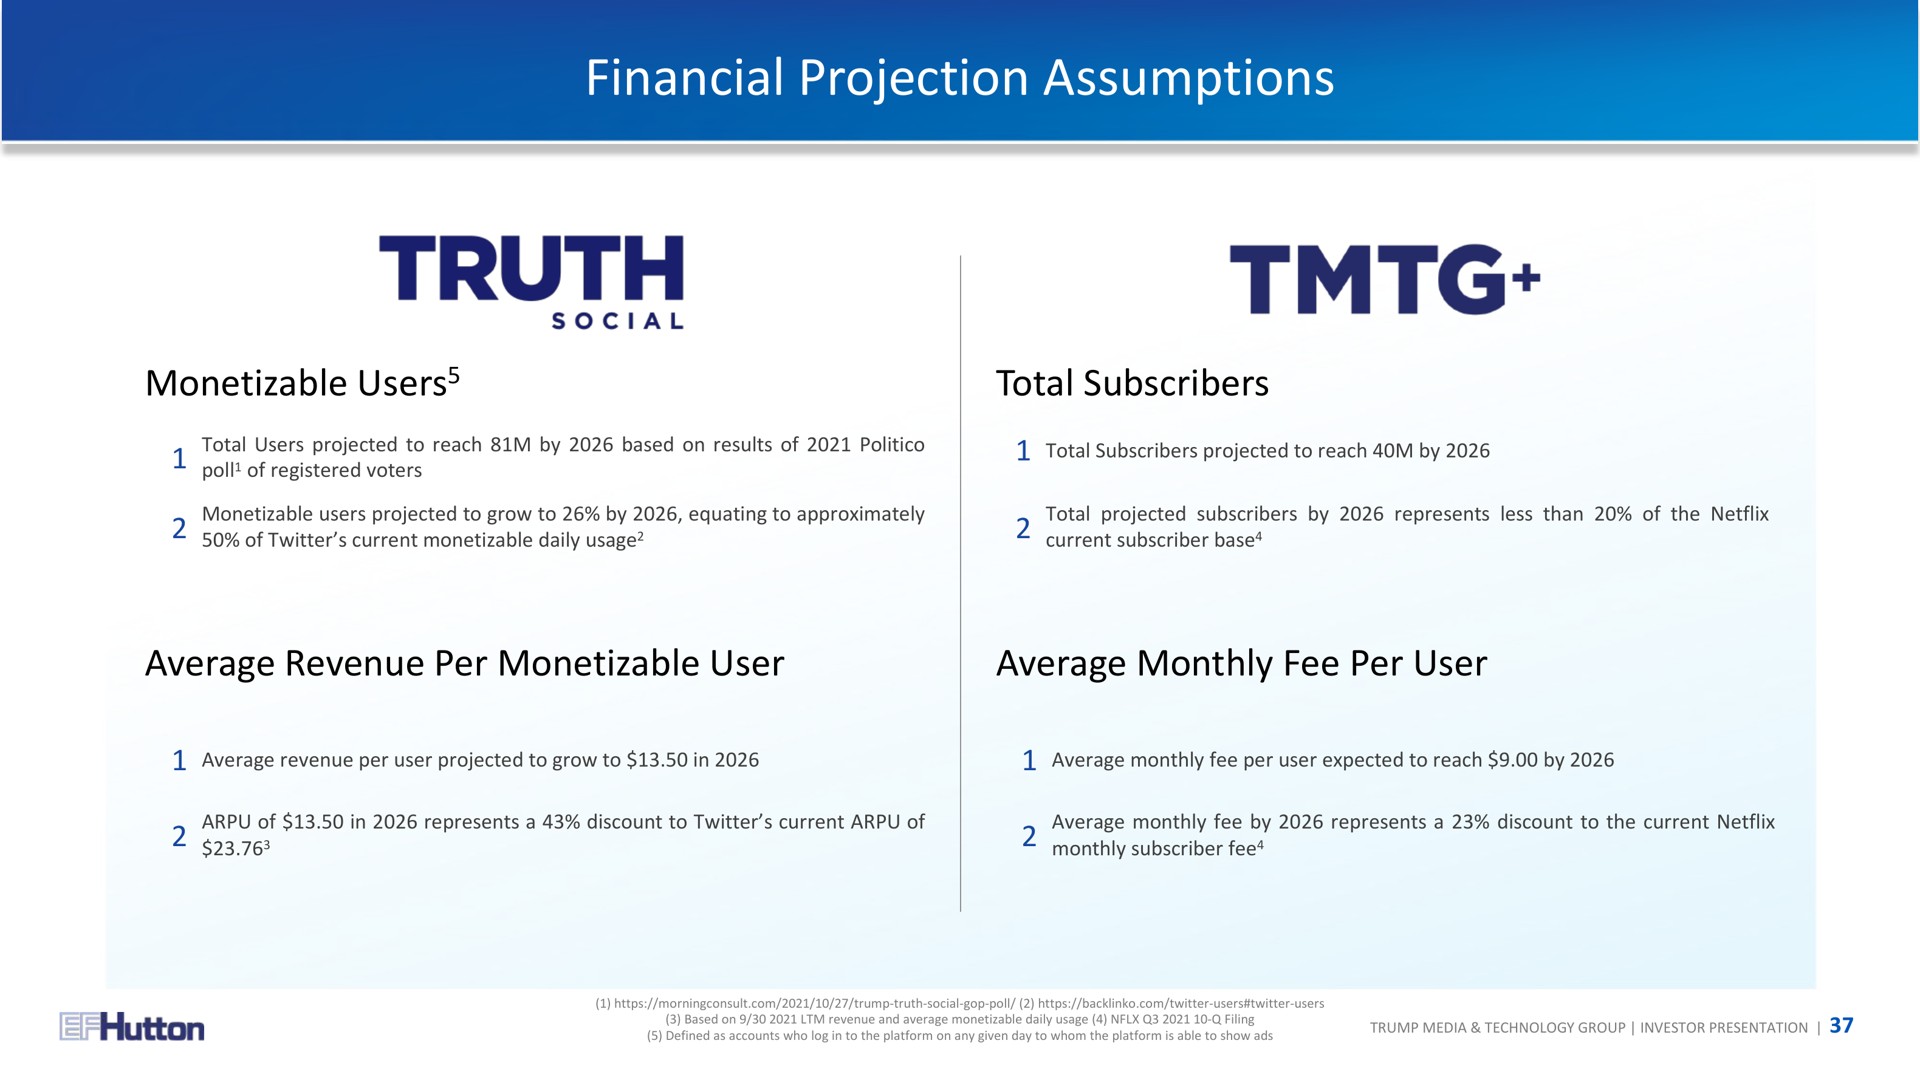 financial projection assumptions truth | TMTG